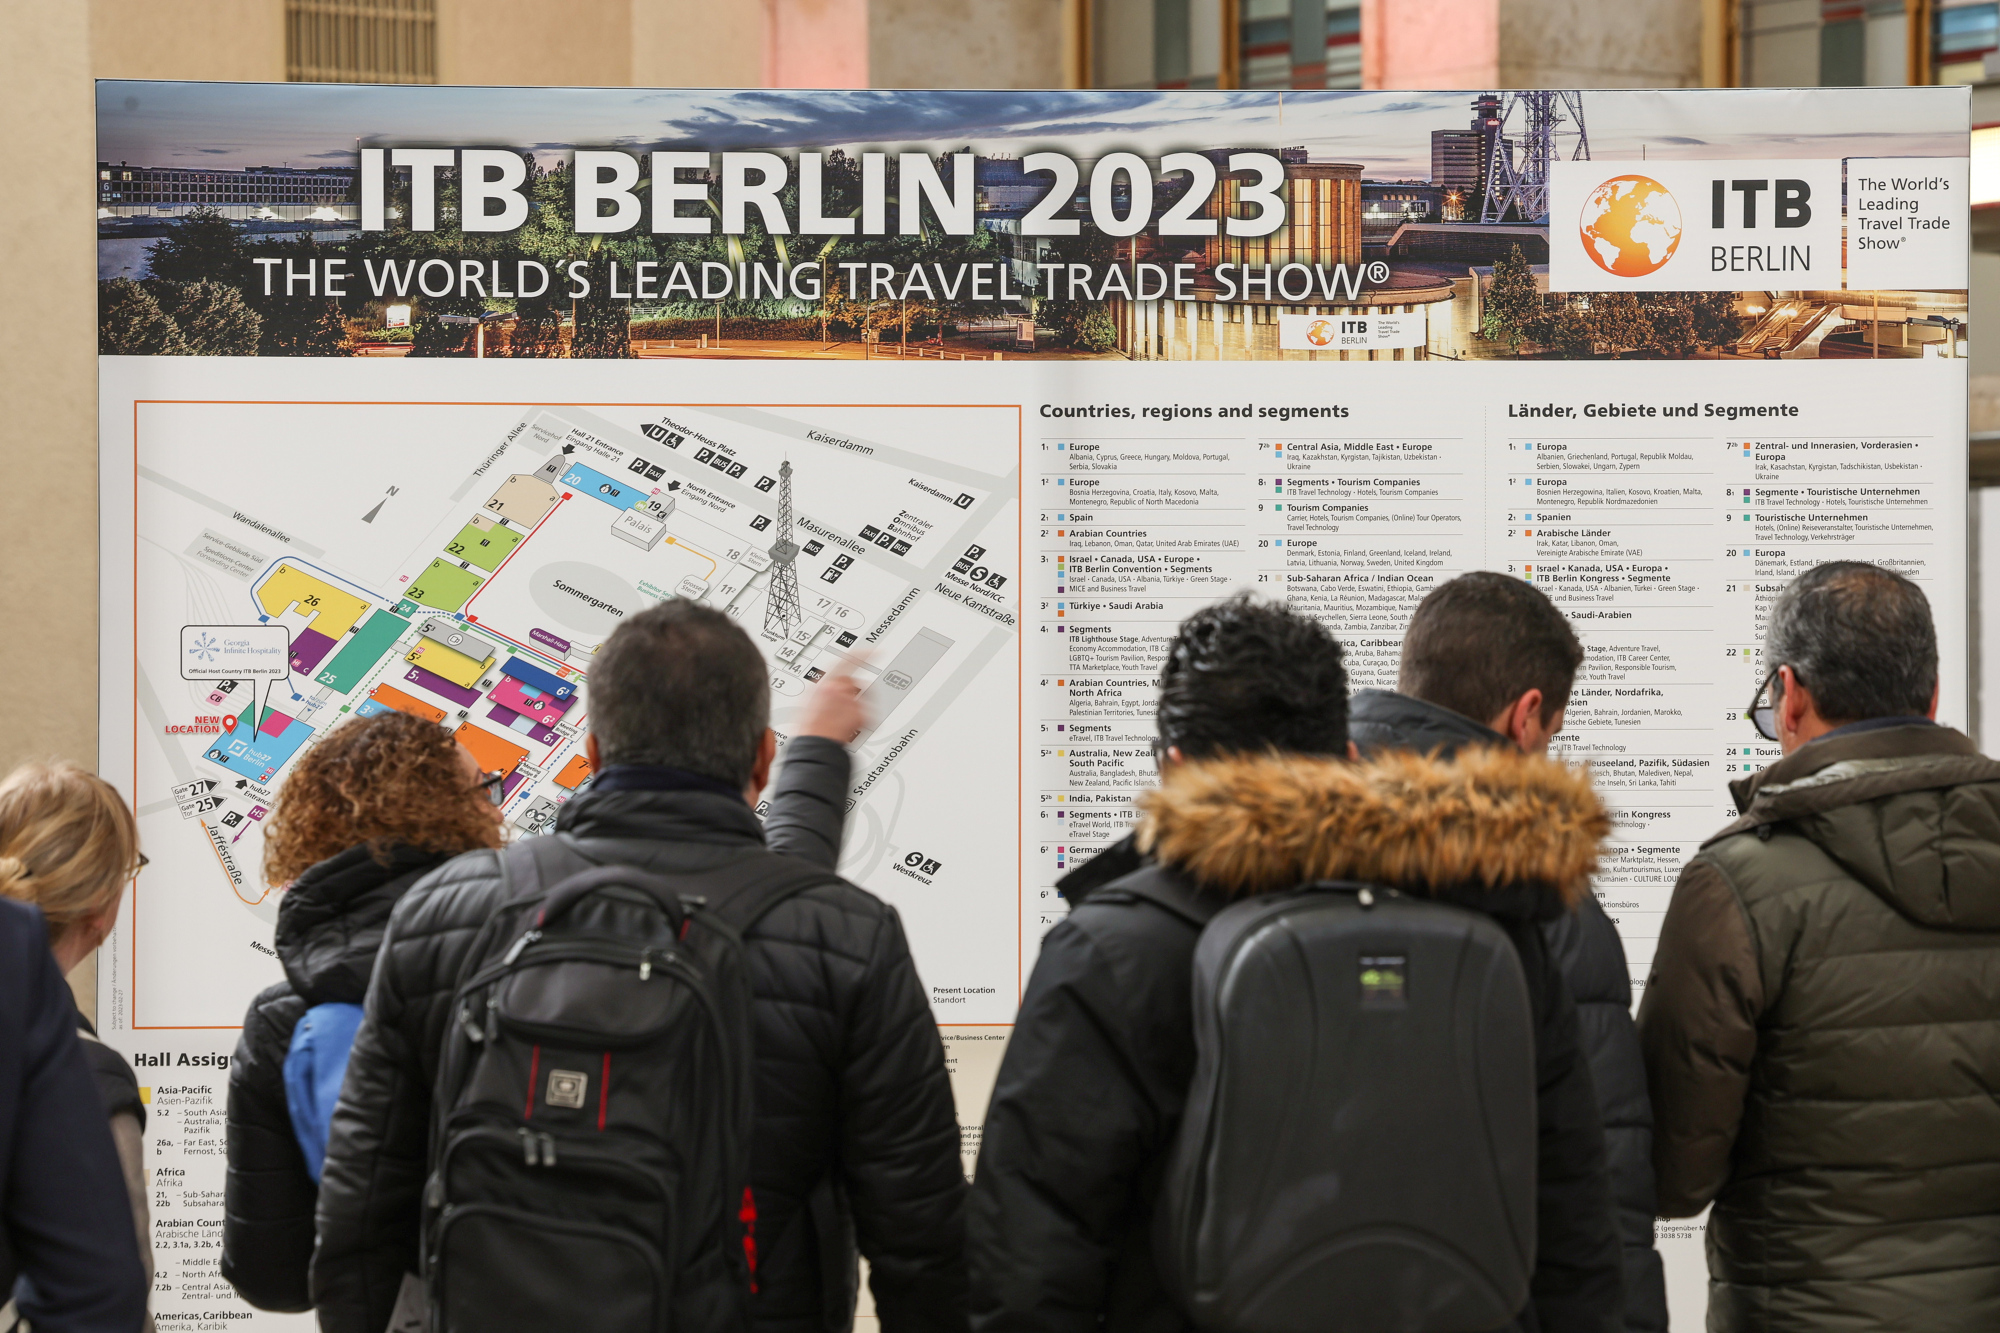 It's a wrap for ITB Berlin, with over 5500 exhibitors and 90,000